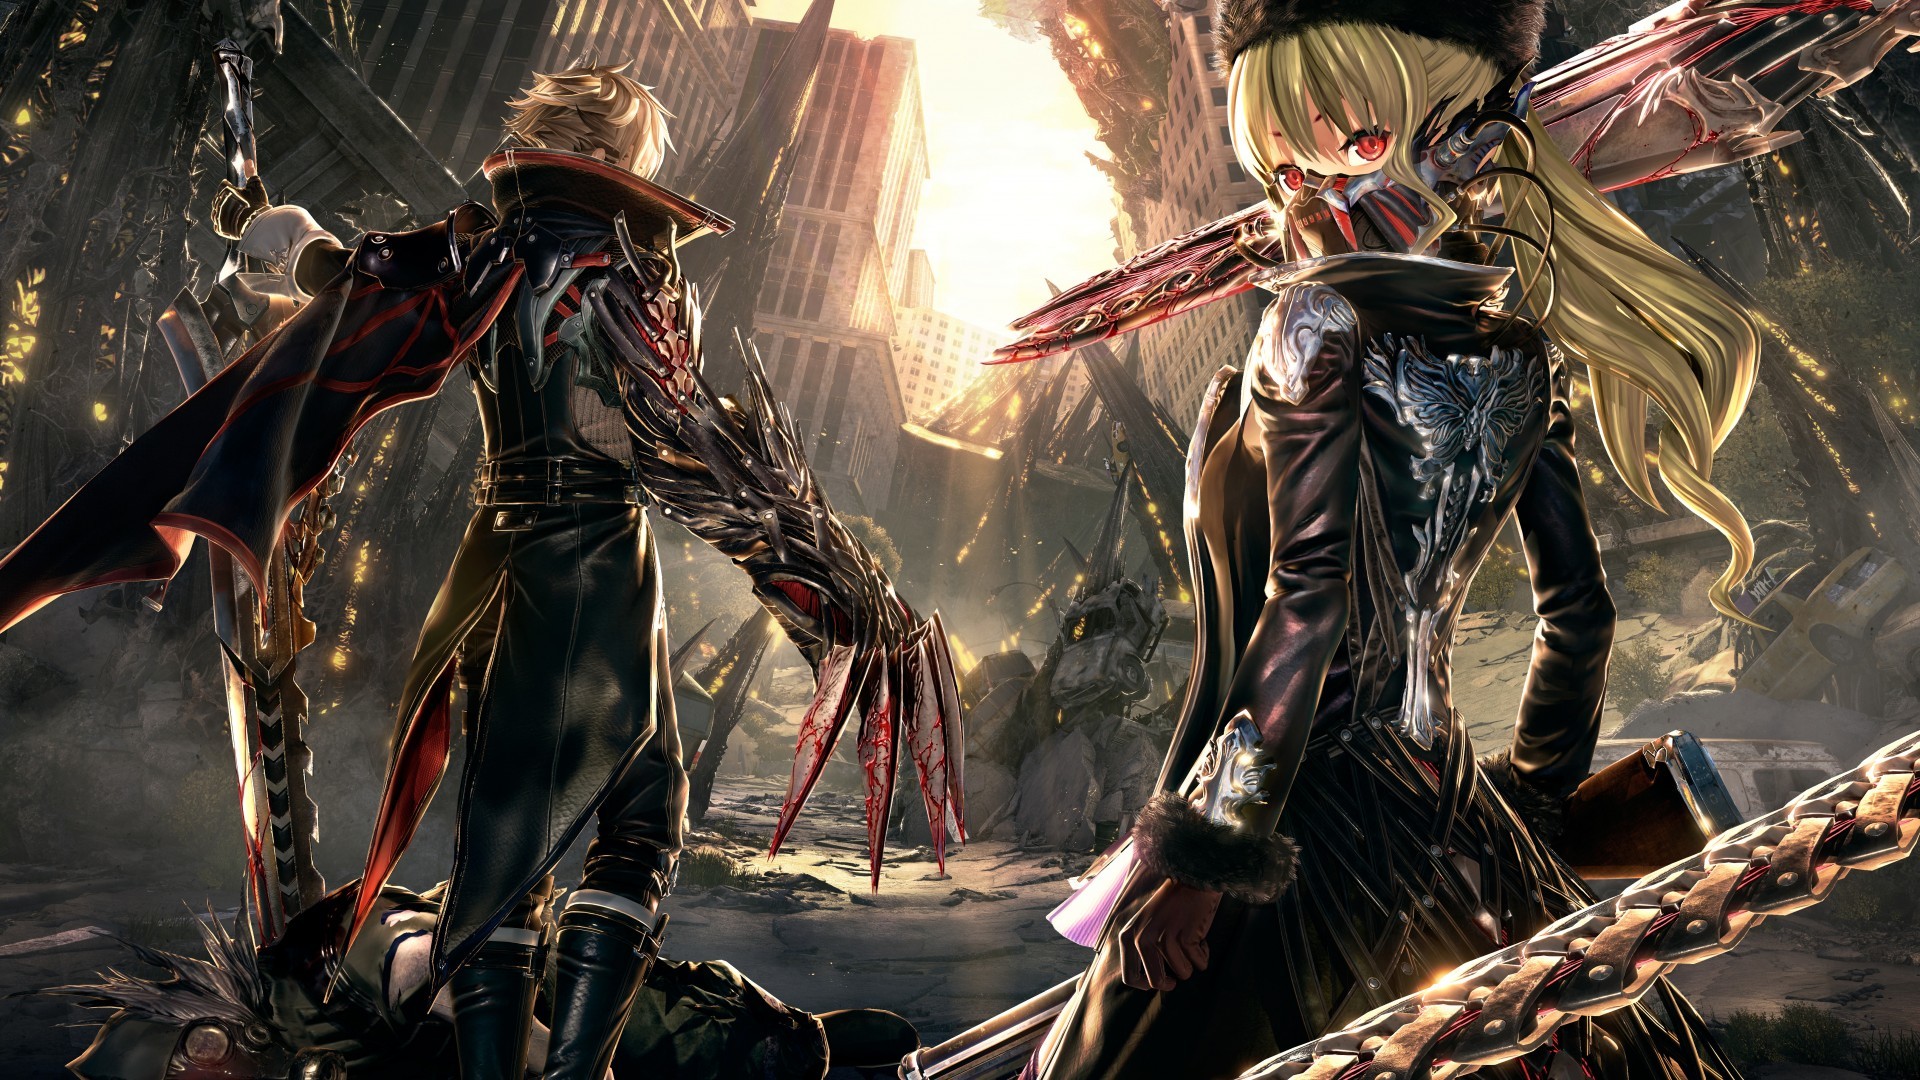 1920x1080 Code Vein Playstation 4 Xbox One Pc 2018 Hd Wallpaper